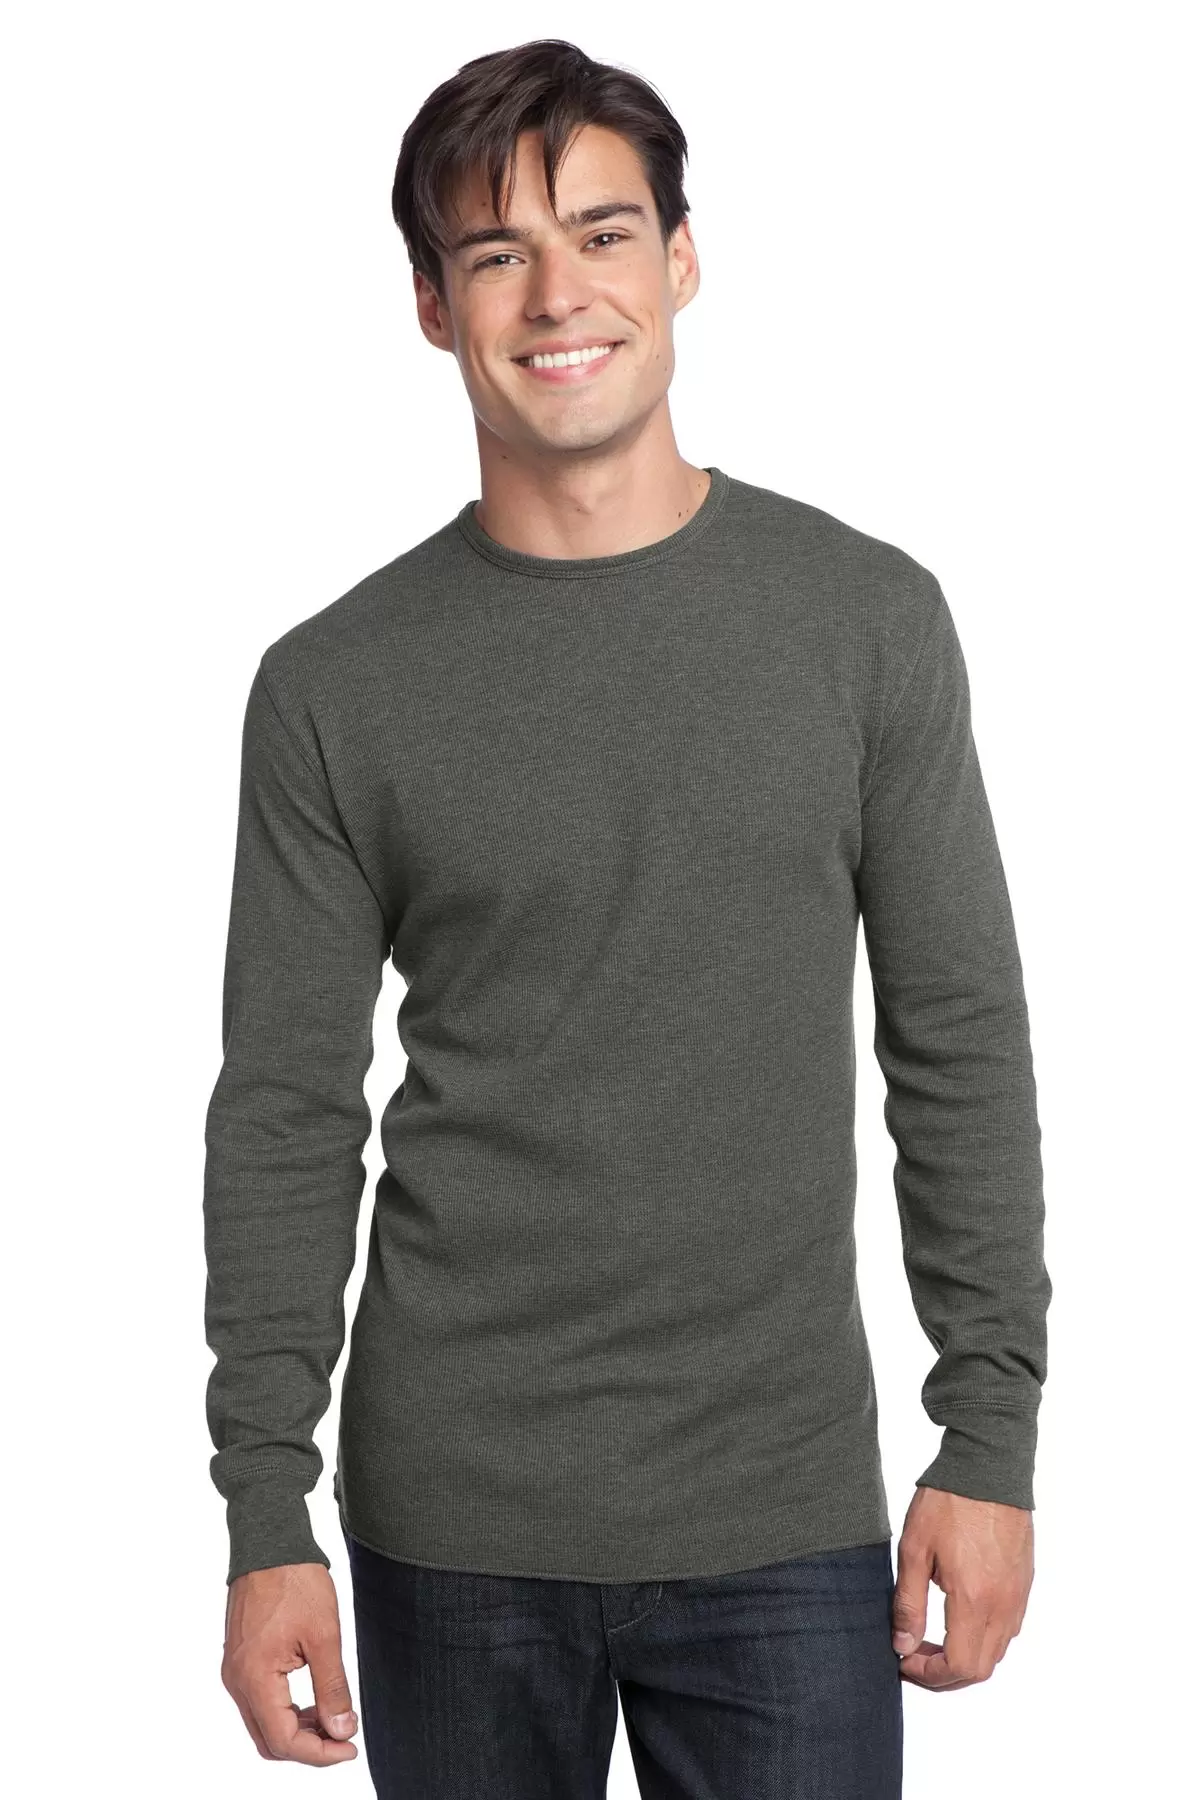 District Young Mens Long Sleeve Thermal DT118 - blankstyle.com